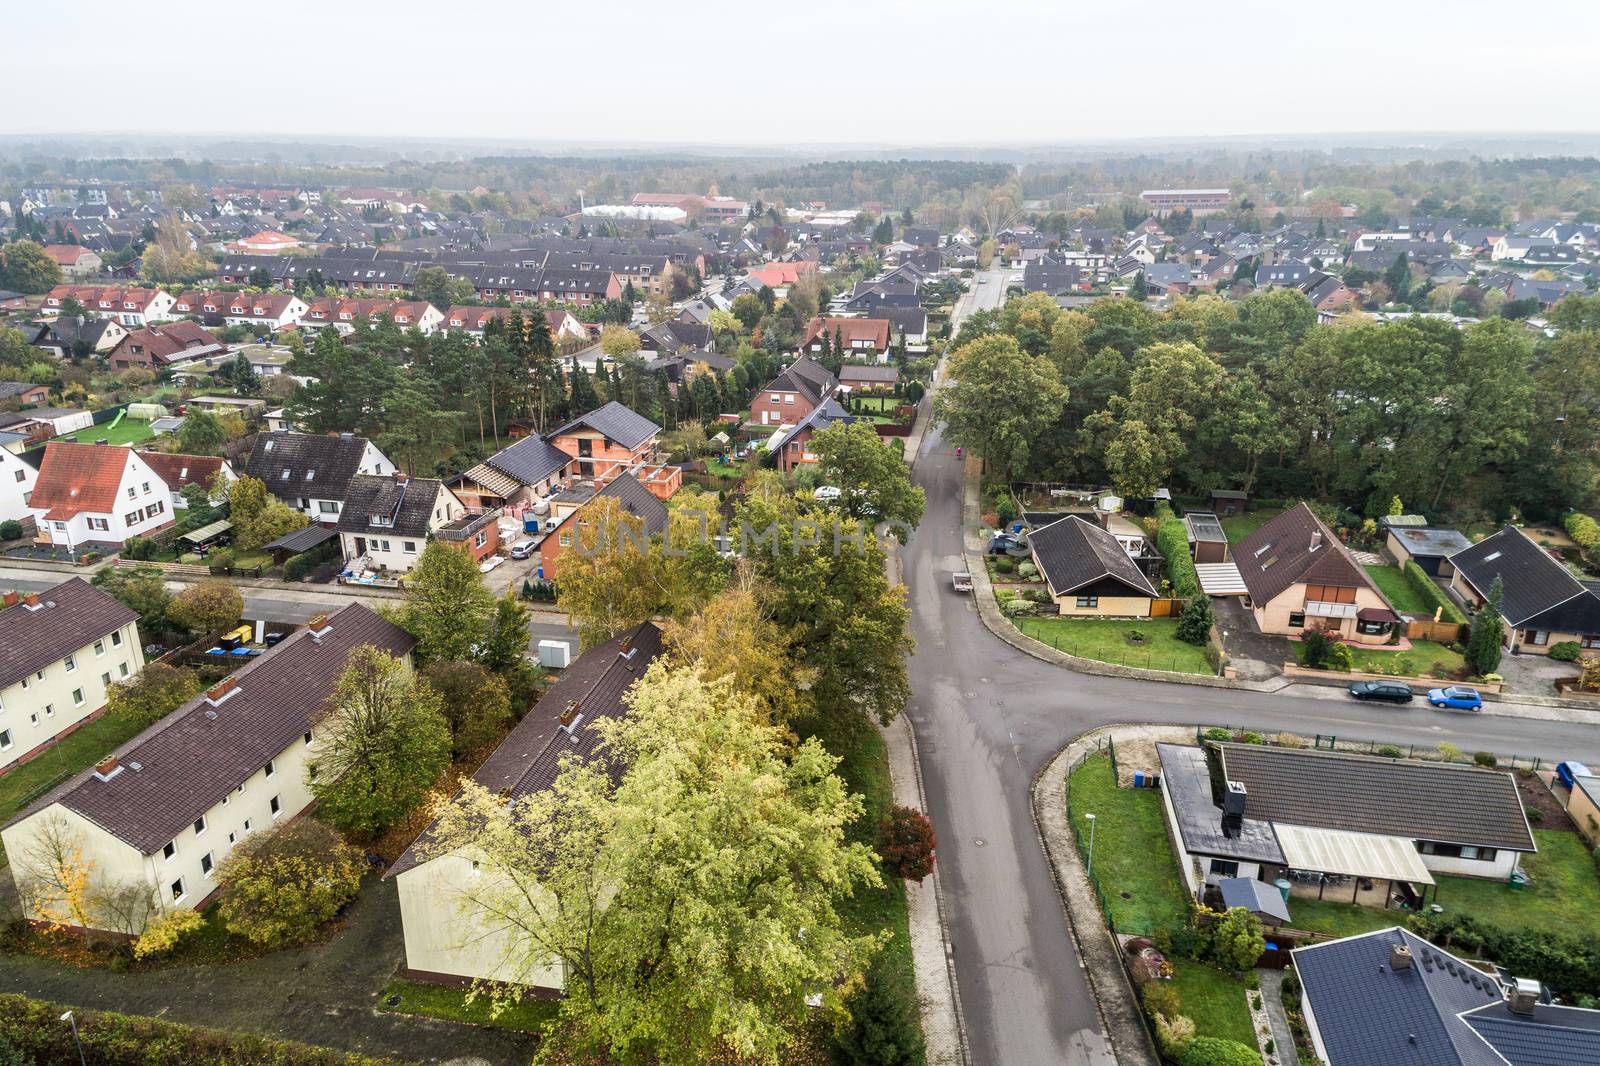 Suburban settlement in Germany with terraced houses, home for ma by geogif